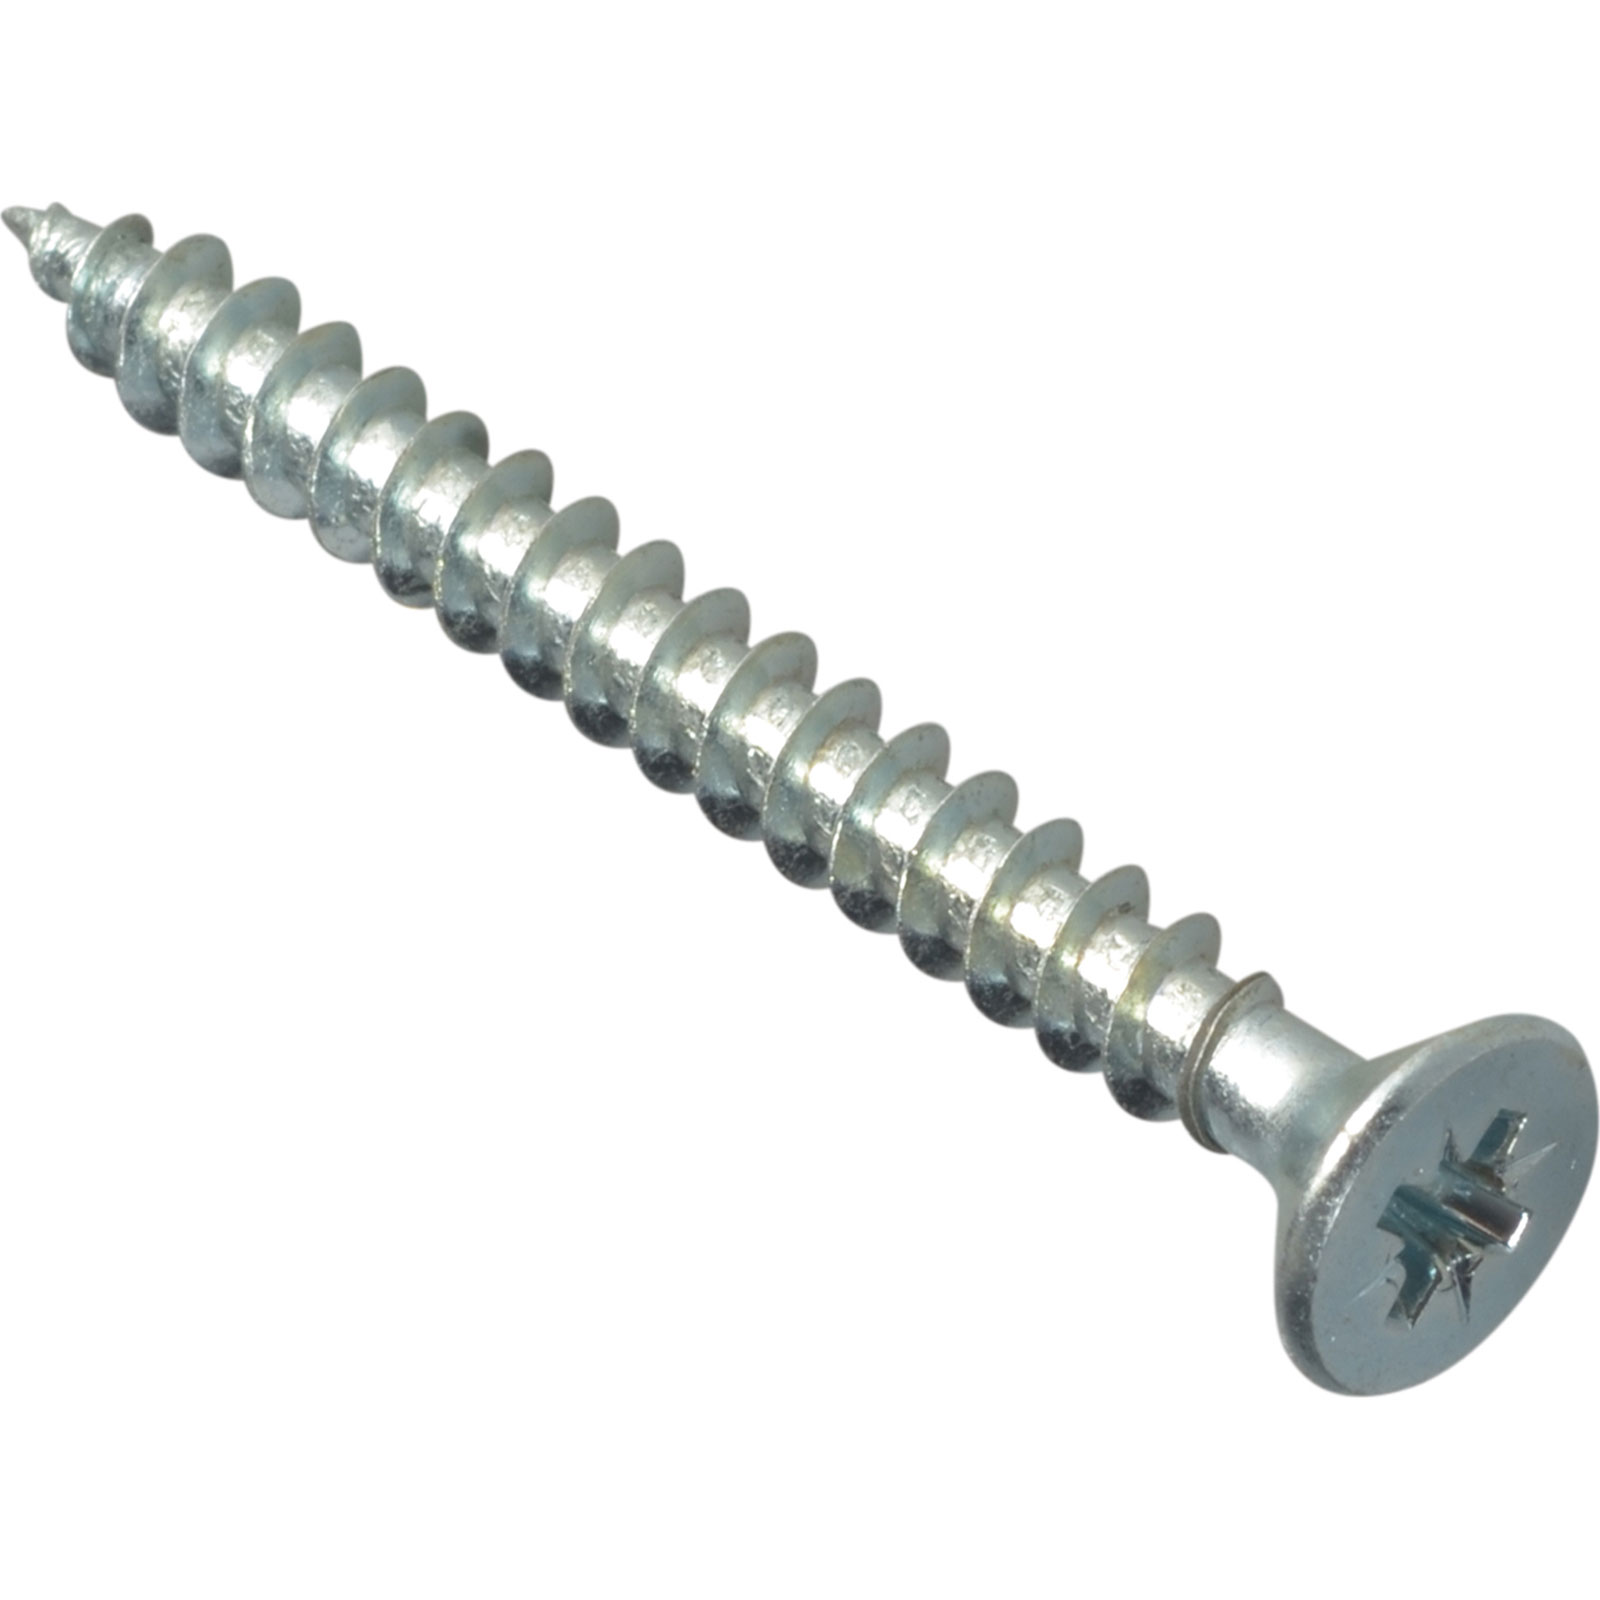 Image of Forgefix Multi Purpose Zinc Plated Screws 5mm 50mm Pack of 12